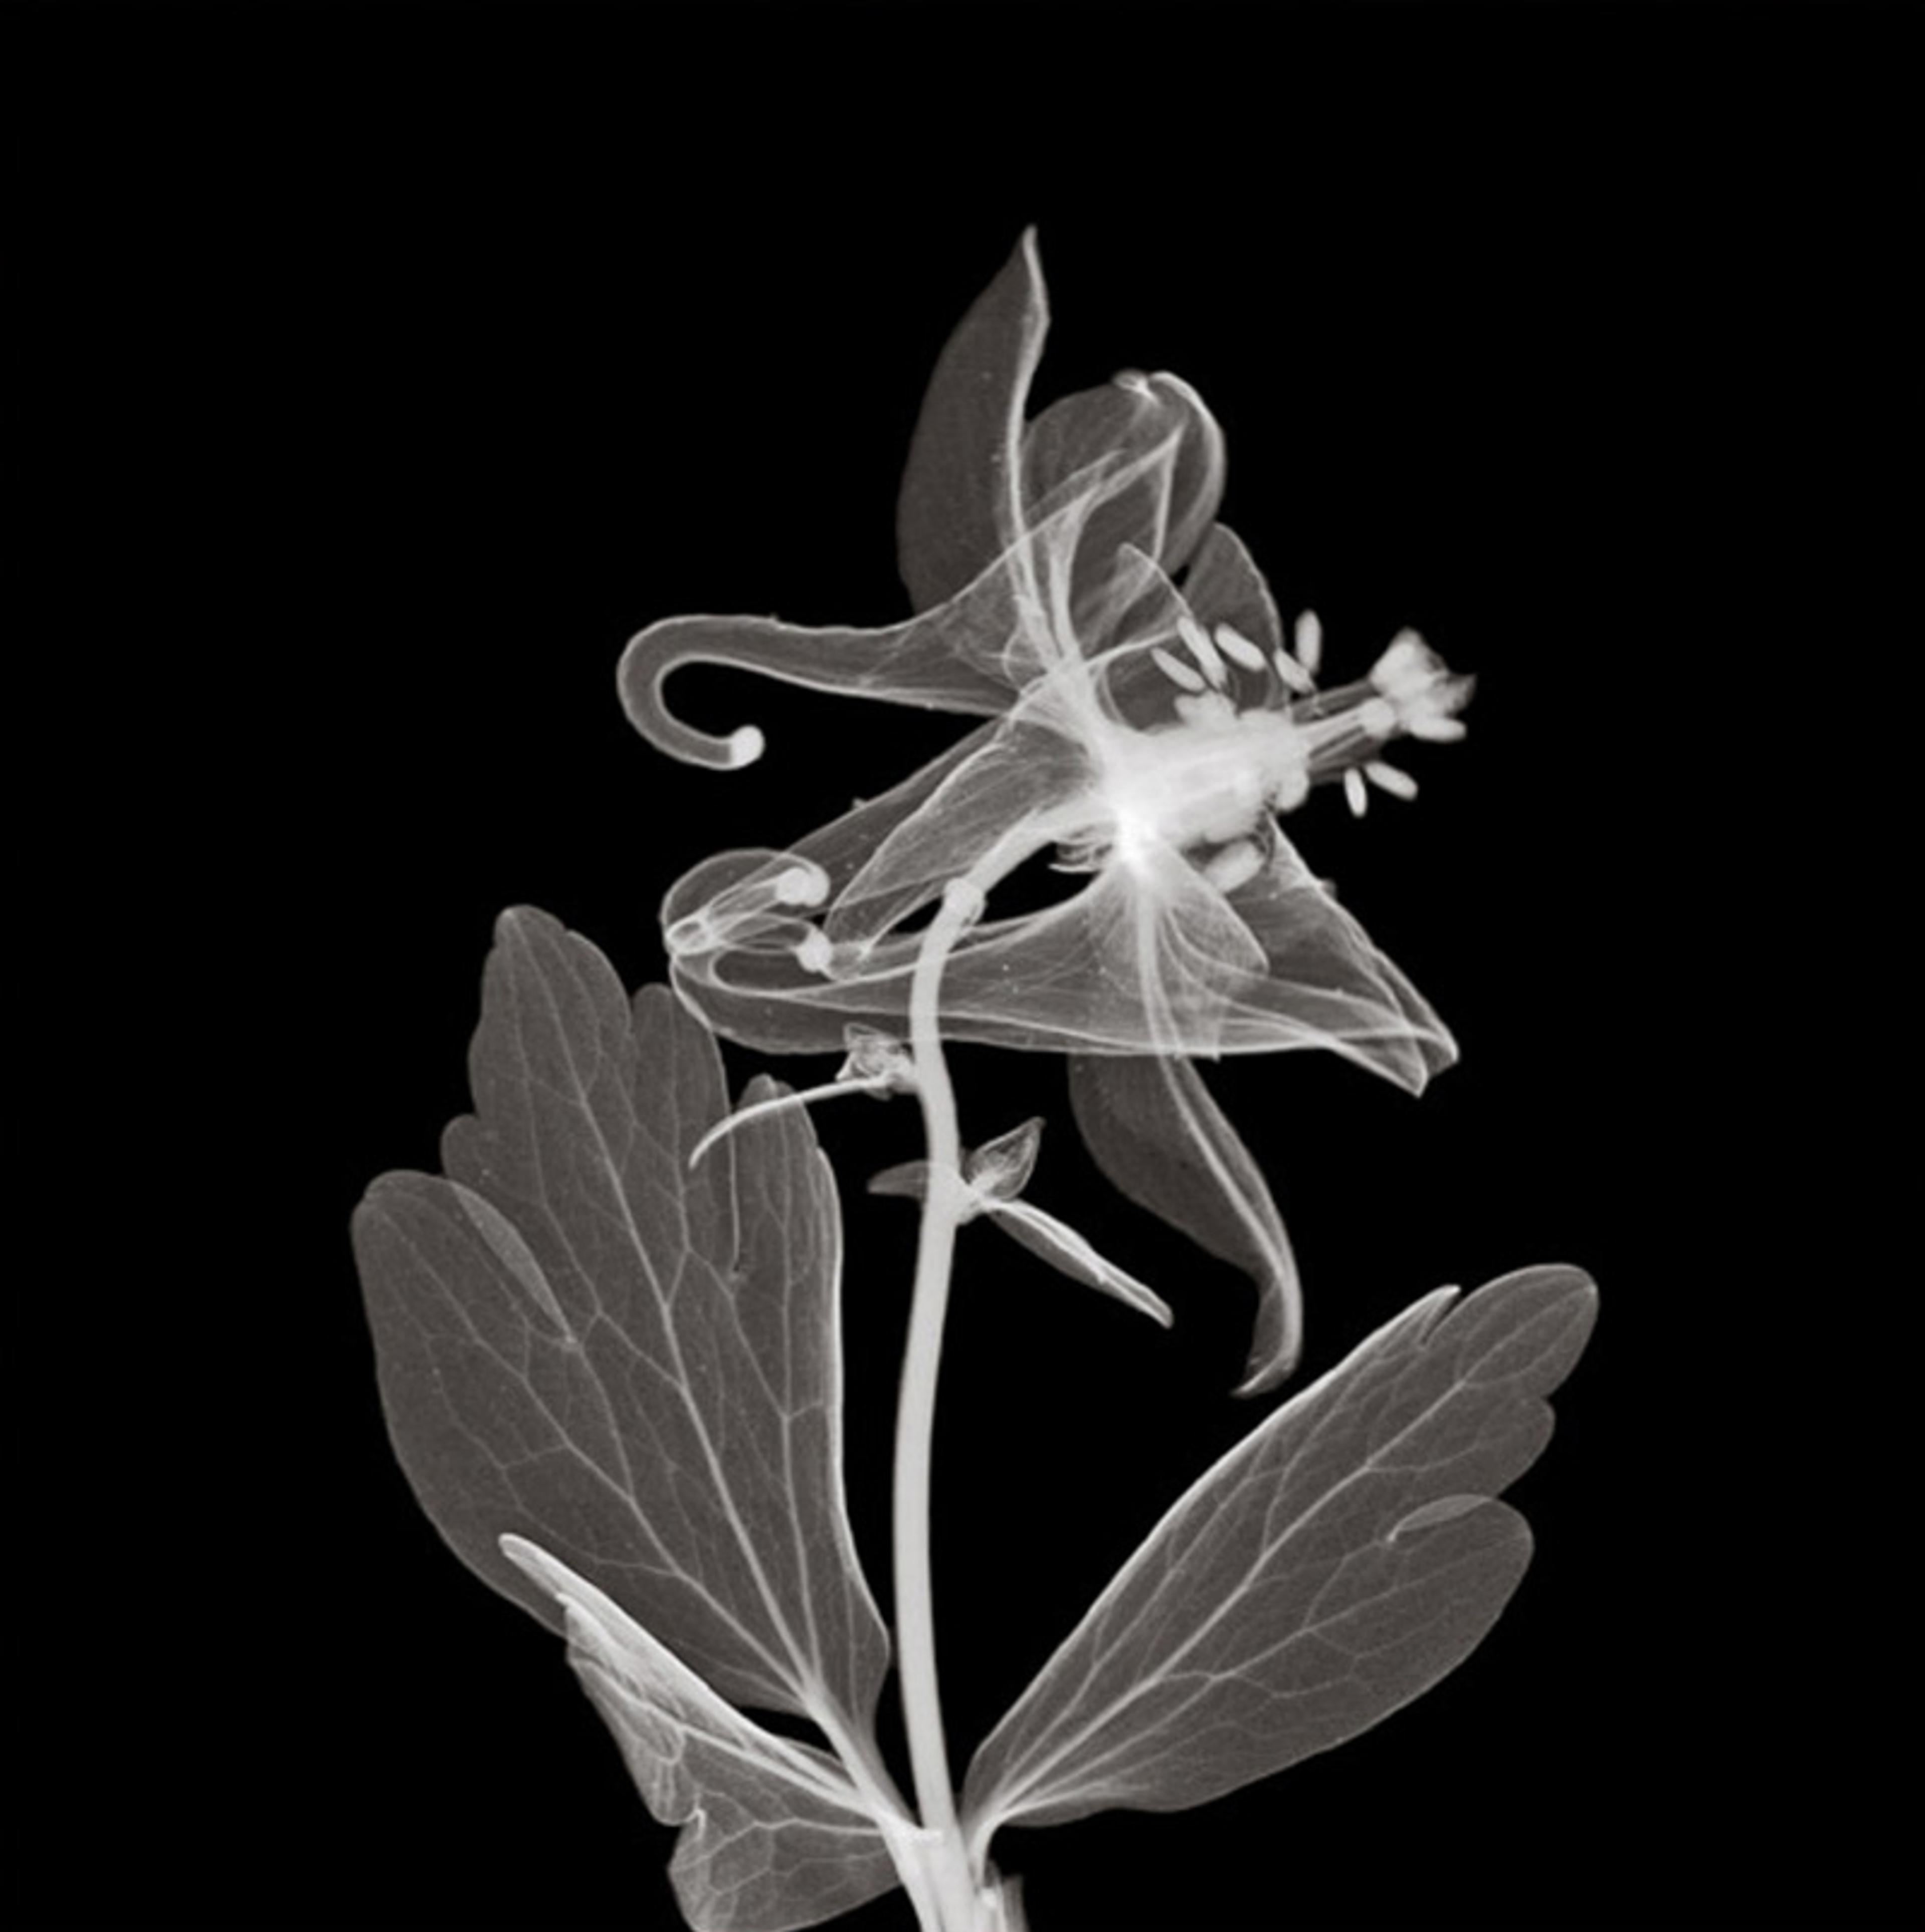 X-ray image of a flowering plant showing detail of leaves, petals, and reproductive parts against a black background.